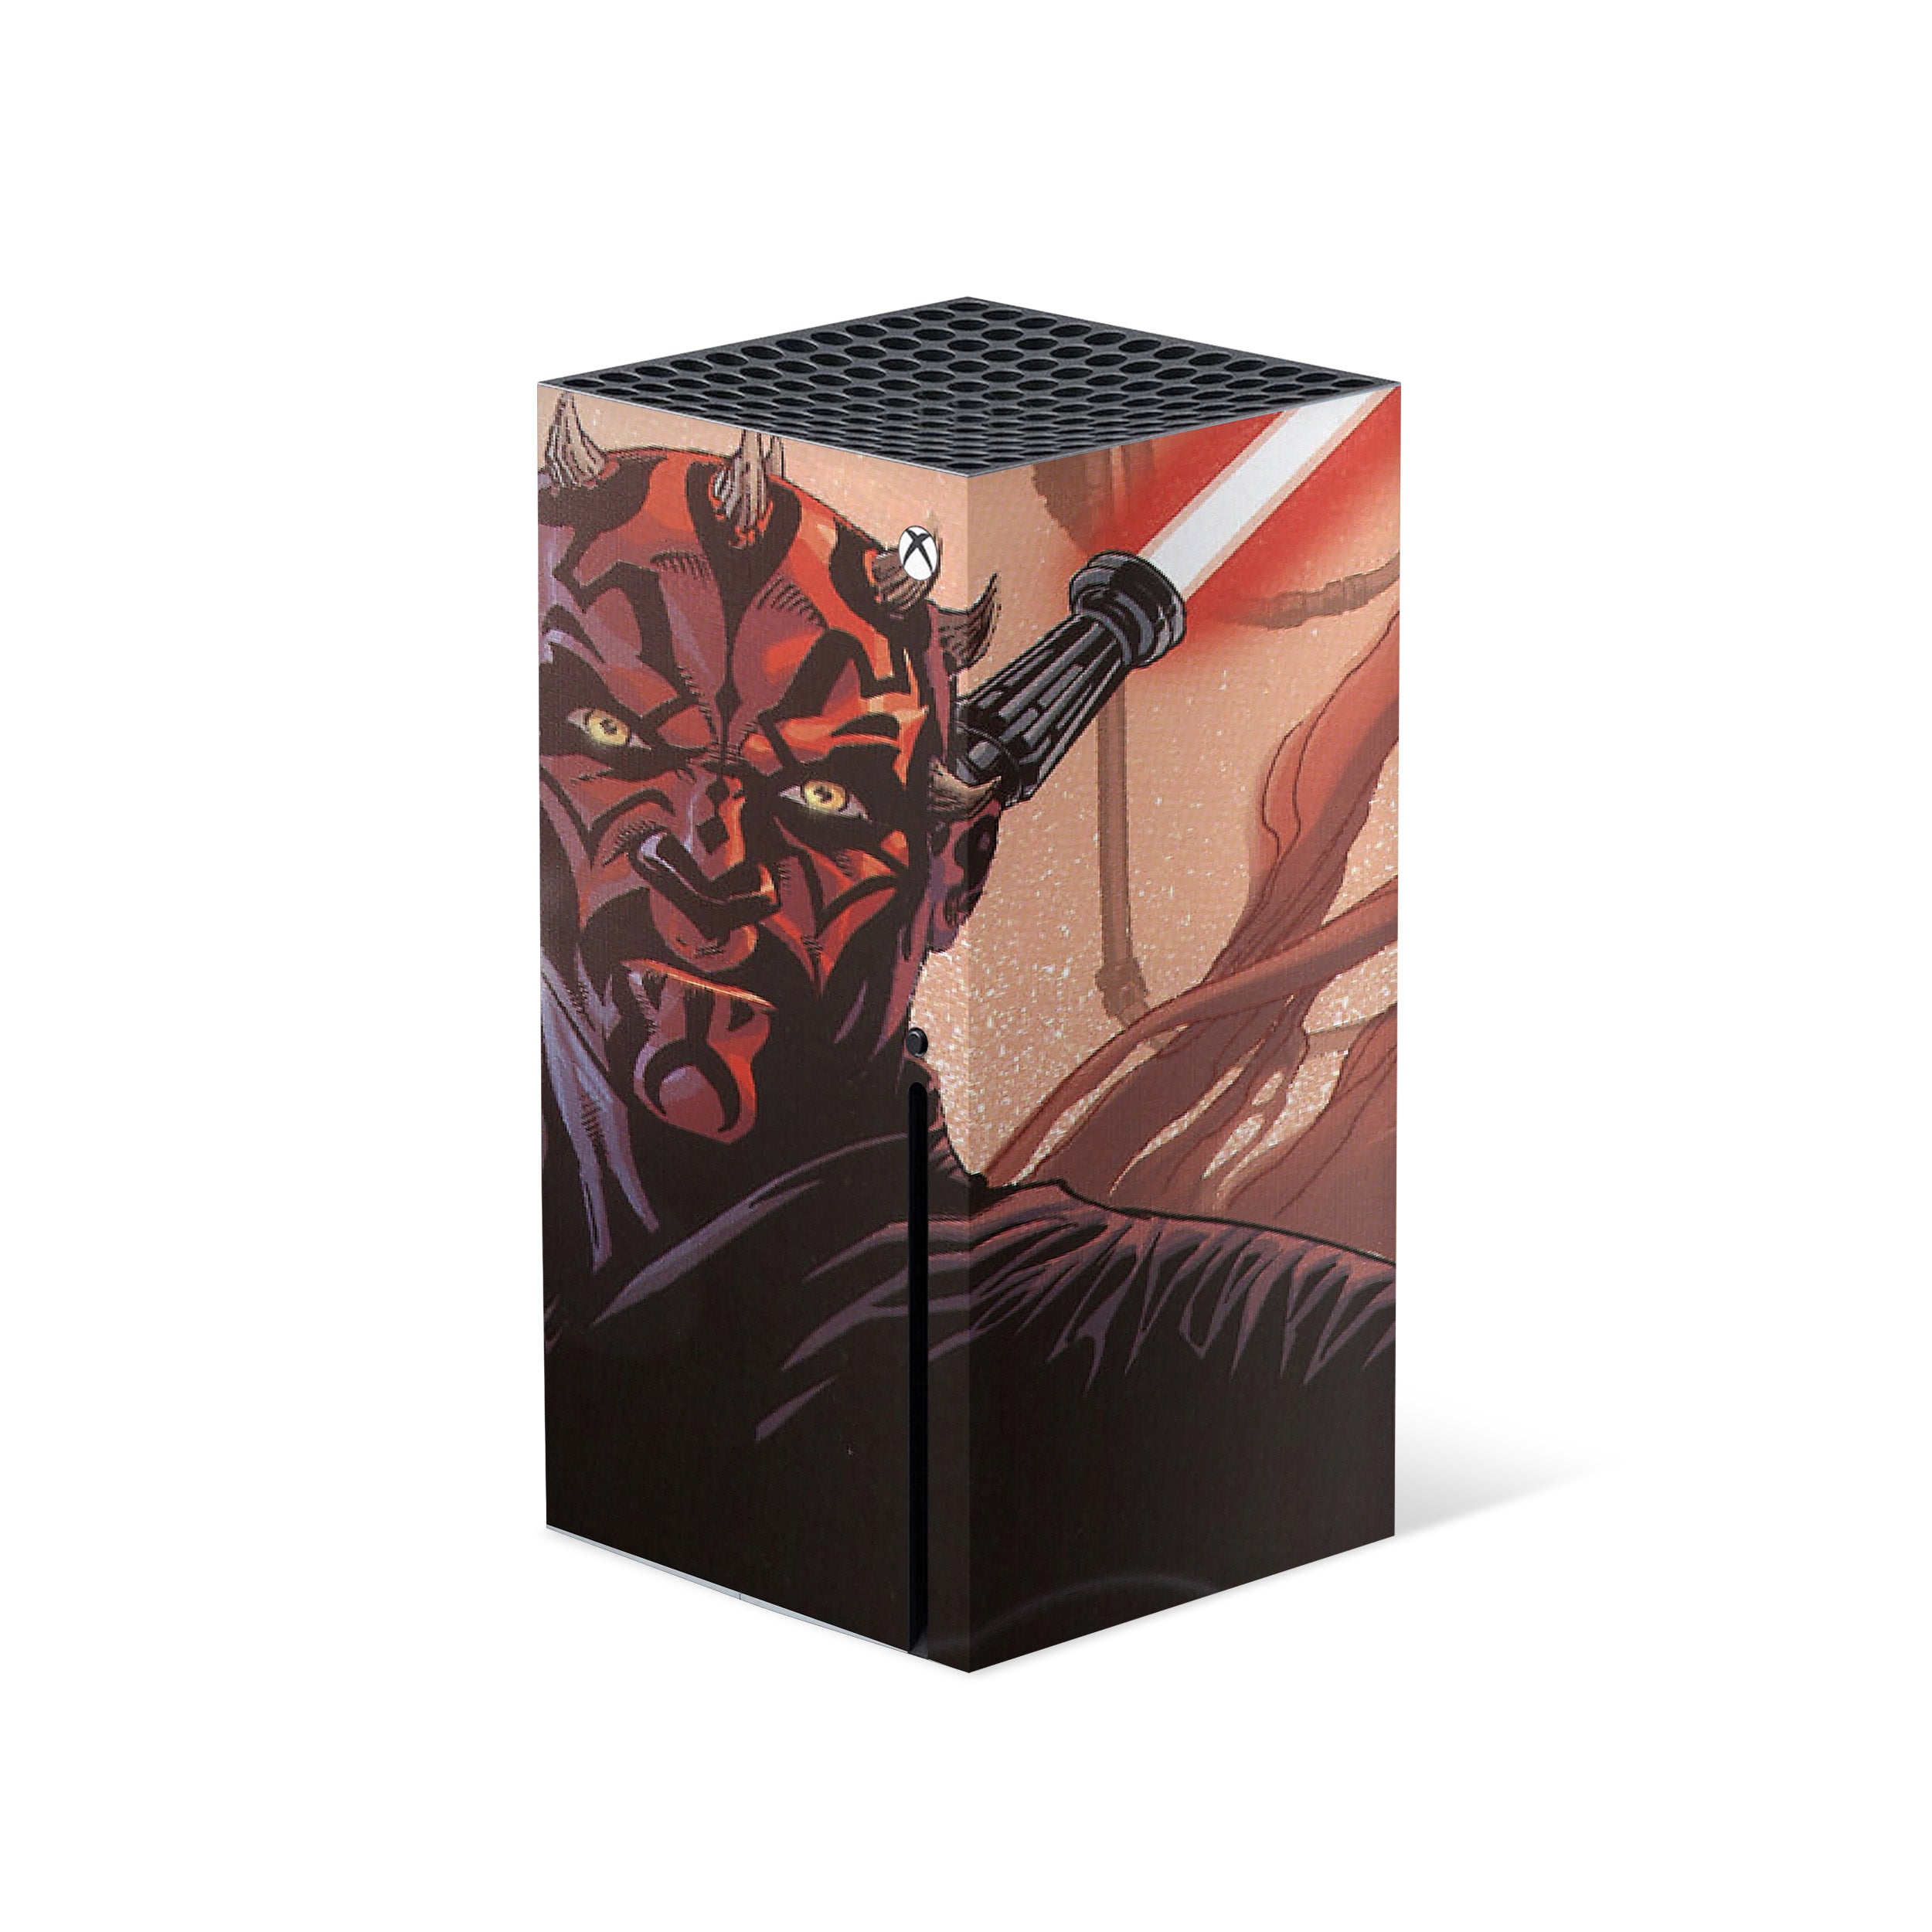 A video game skin featuring a Star Wars Darth Maul design for the Xbox Series X.